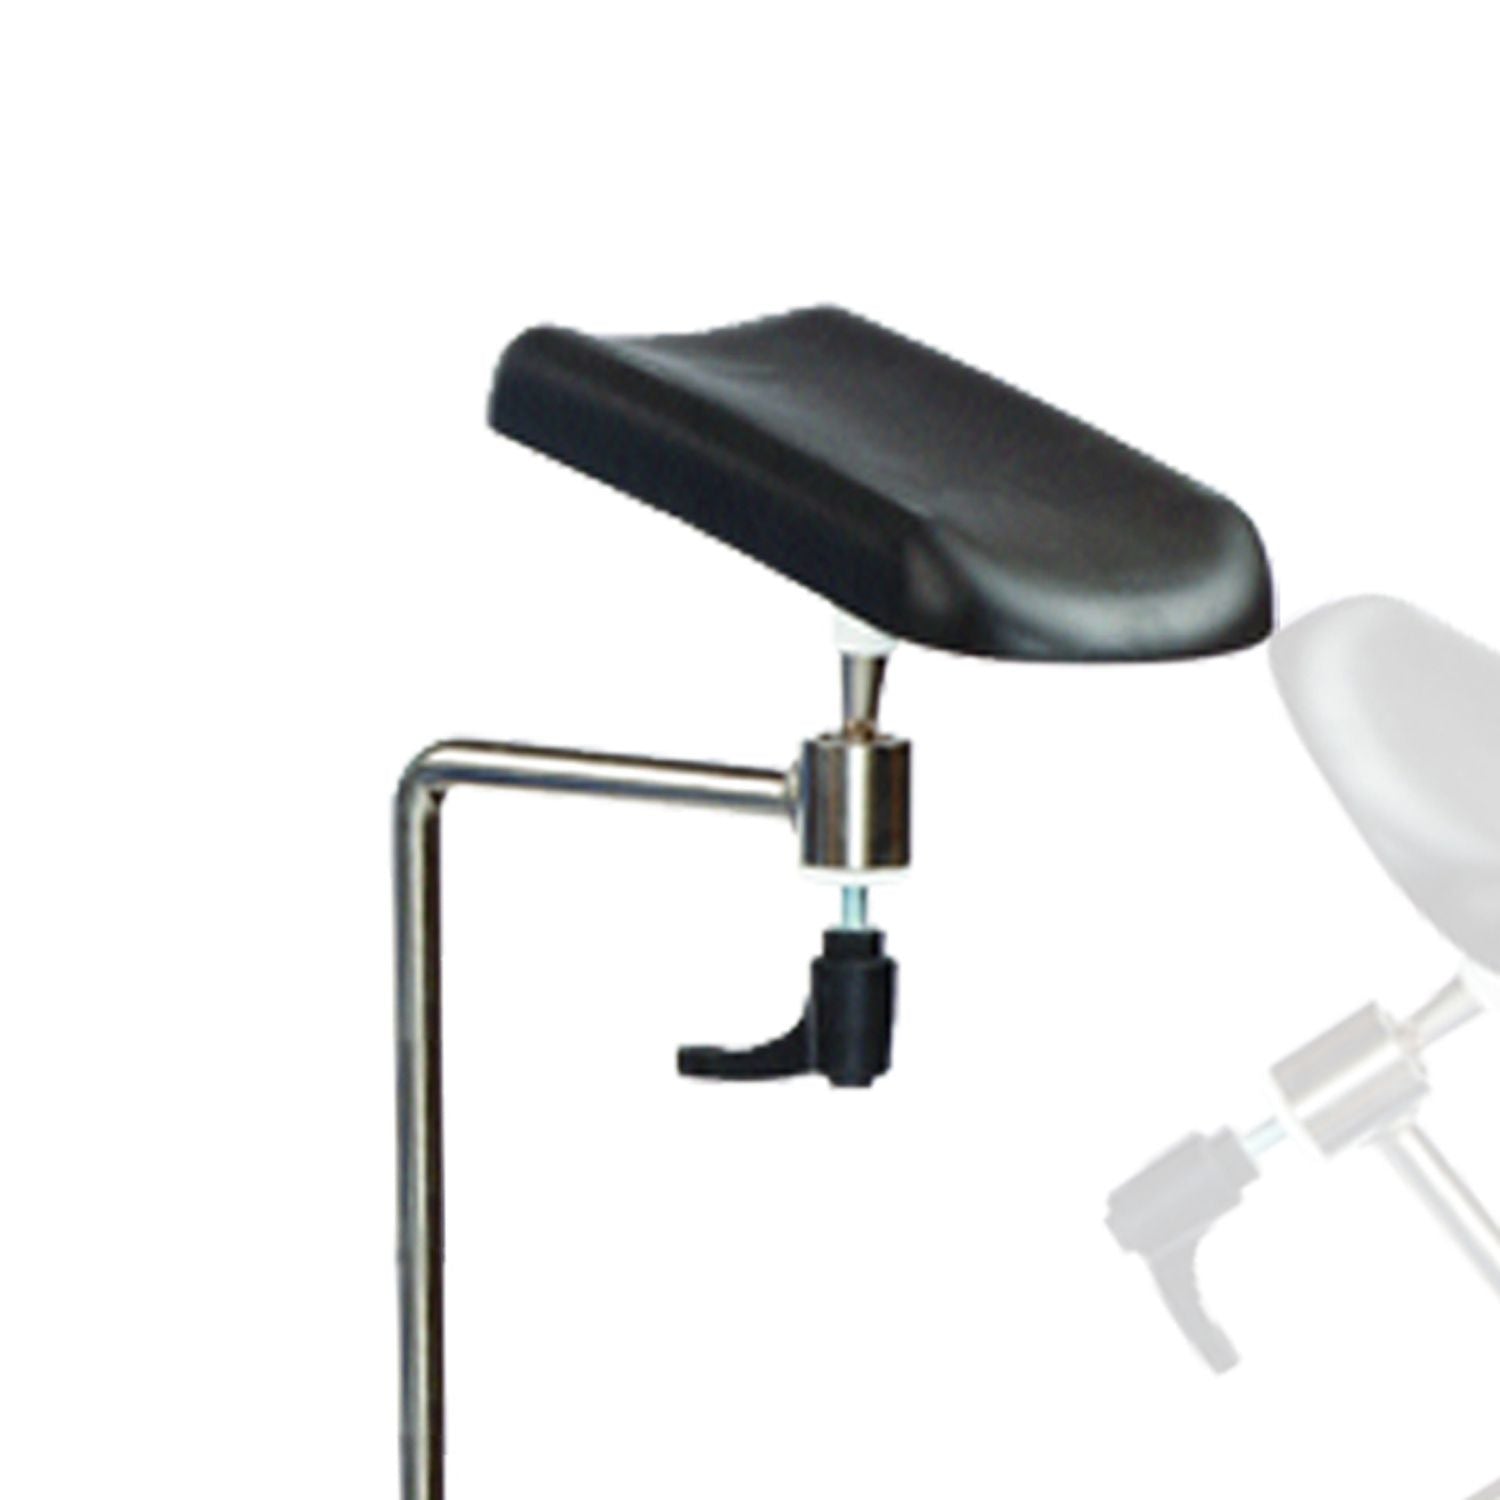 Sunflower Additional Multi-position Arm Rest for Phlebotomy / Treatment Chair